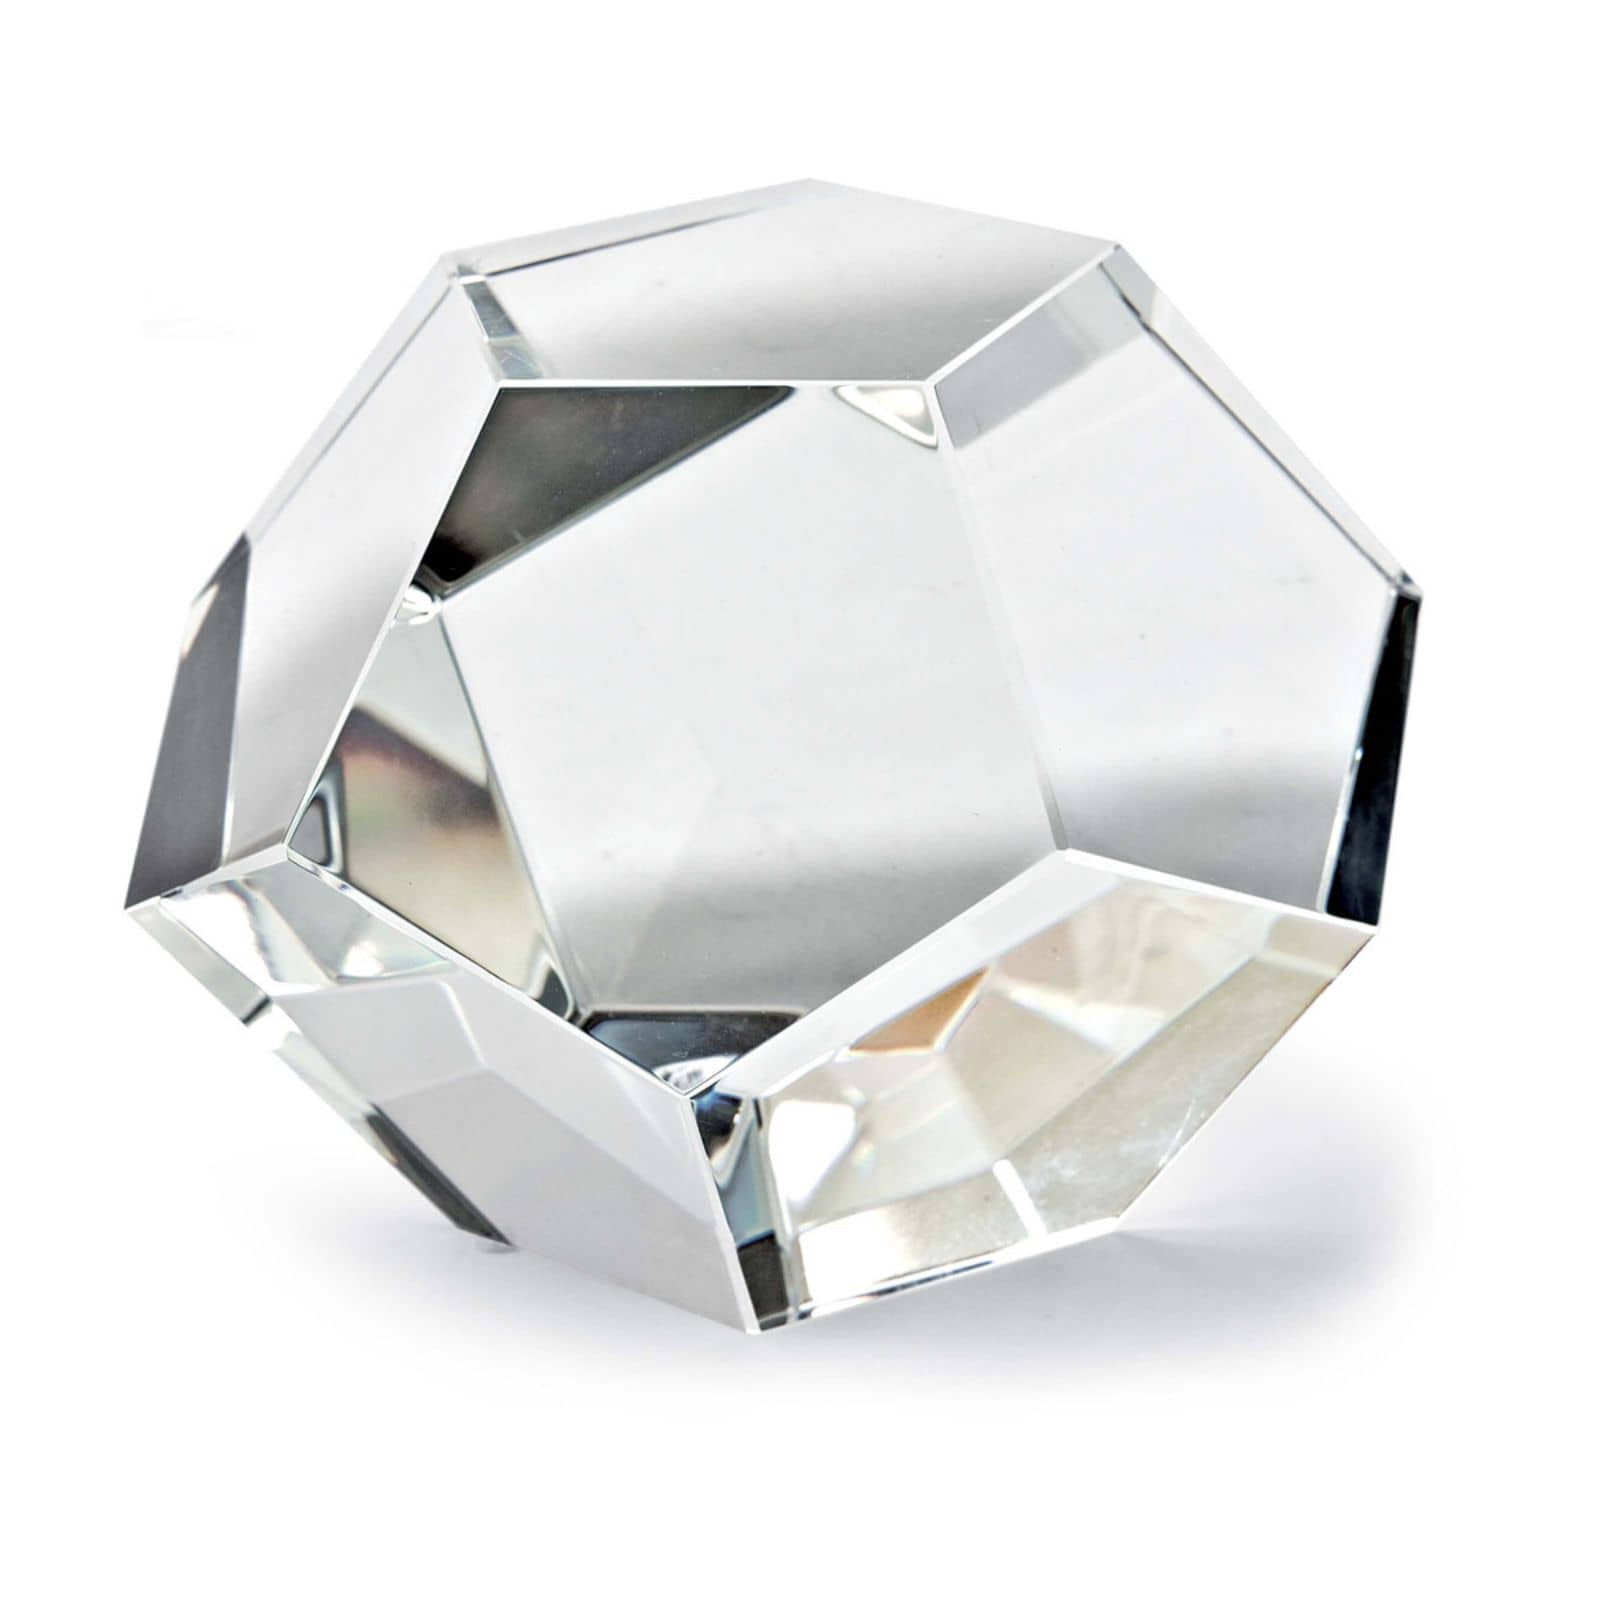 Crystal Dodecahedron Large - Decor - Tipplergoods